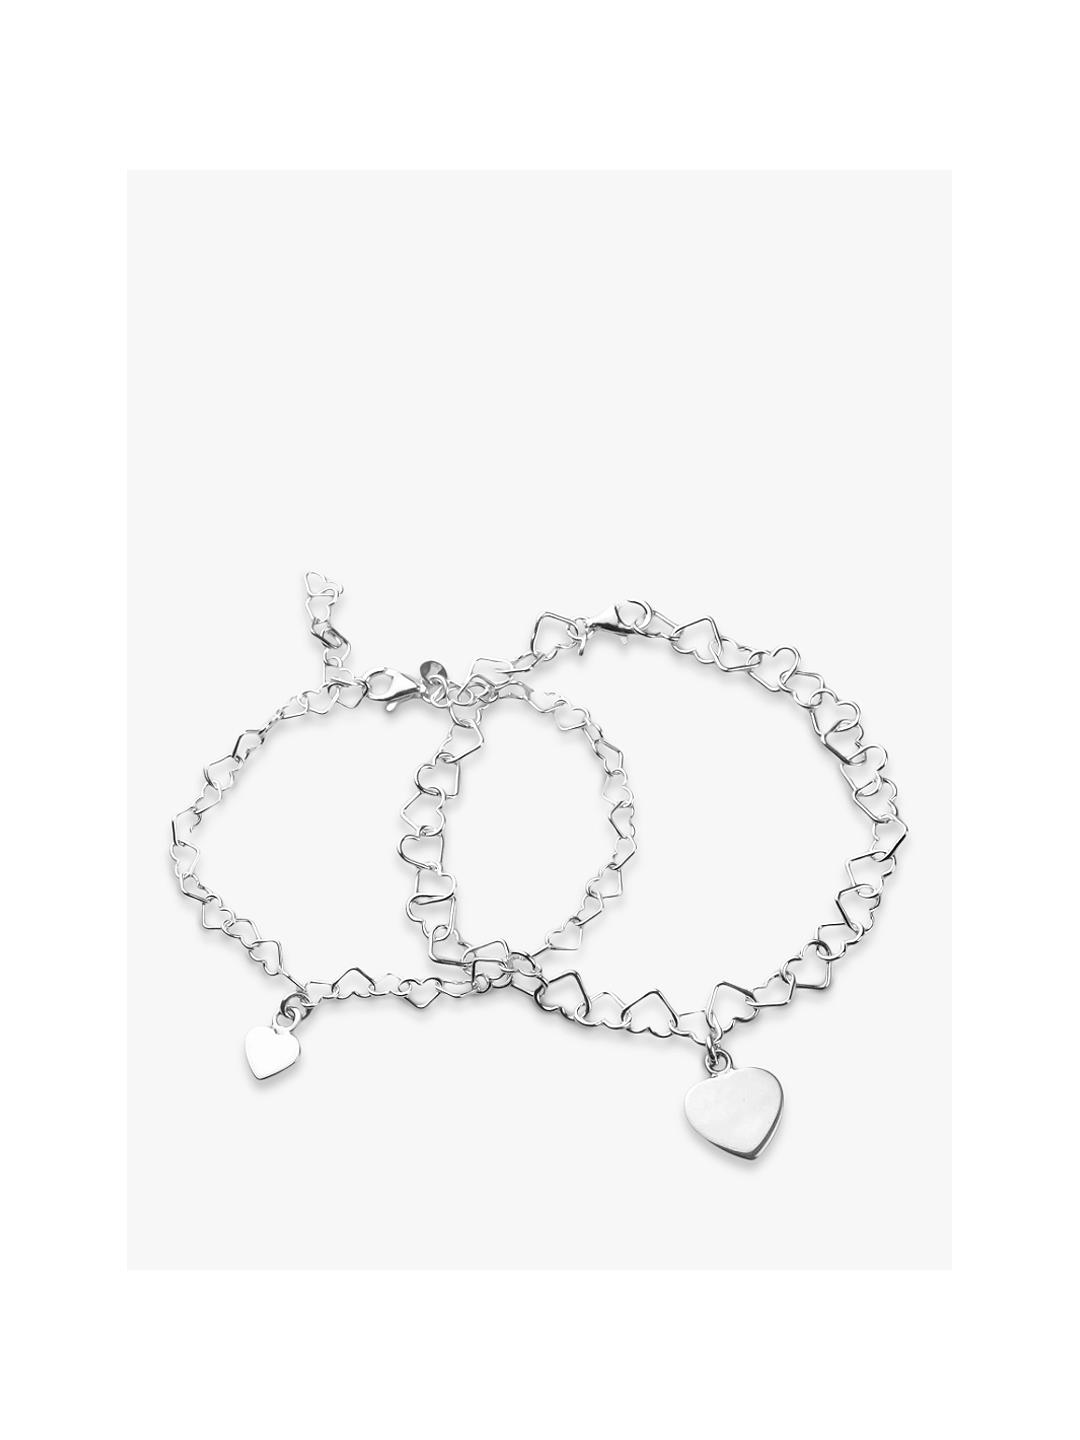 Tales From The Earth Mum & Daughter Linked Heart Bracelet Set, Silver